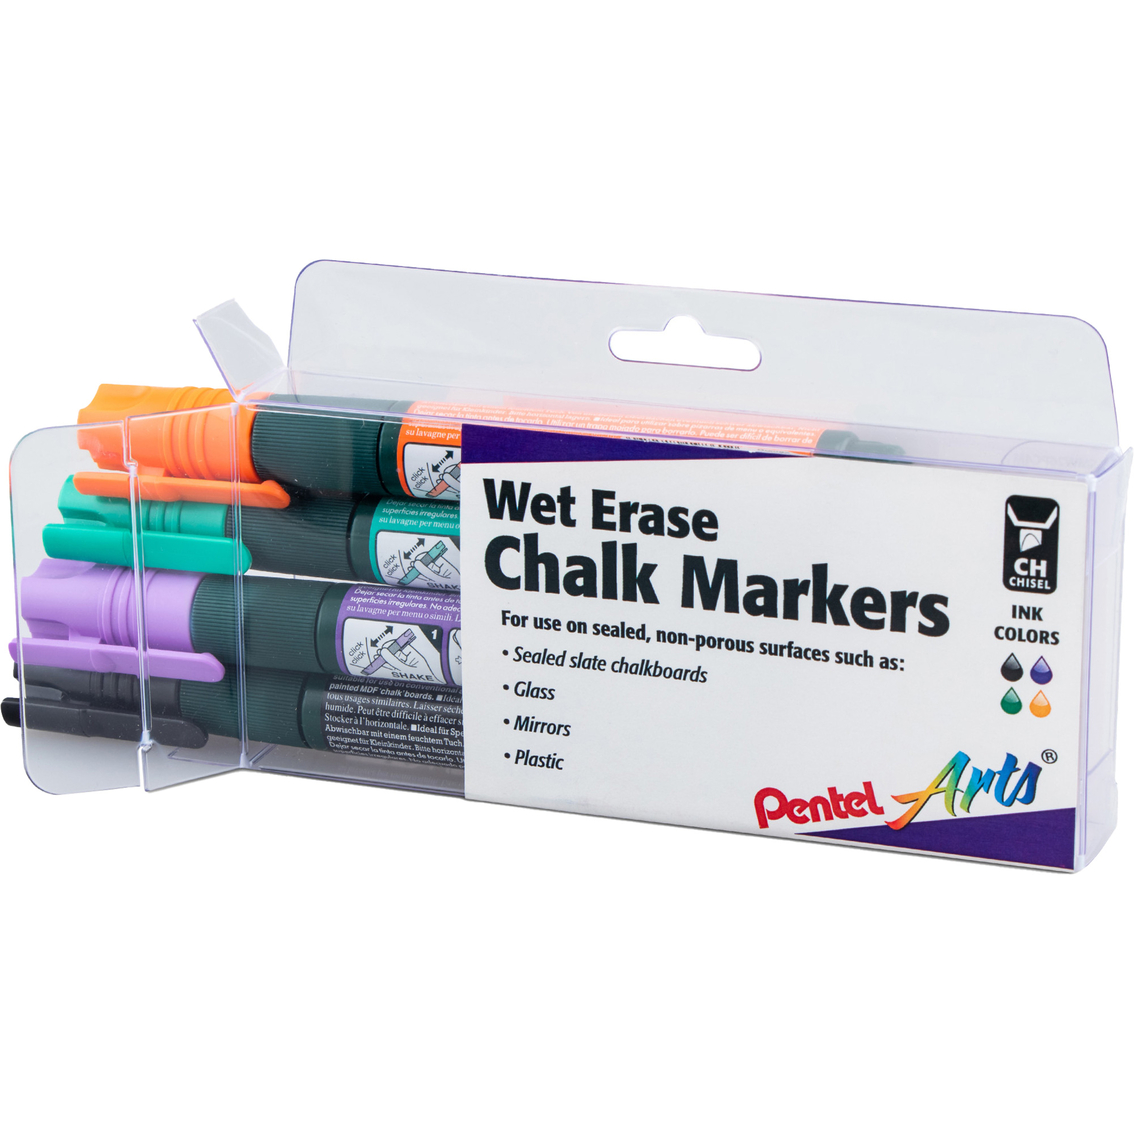 Pentel Arts Wet Erase Chalk Marker 4 pc. Set with Chisel Tip and Plastic Box - Image 2 of 2